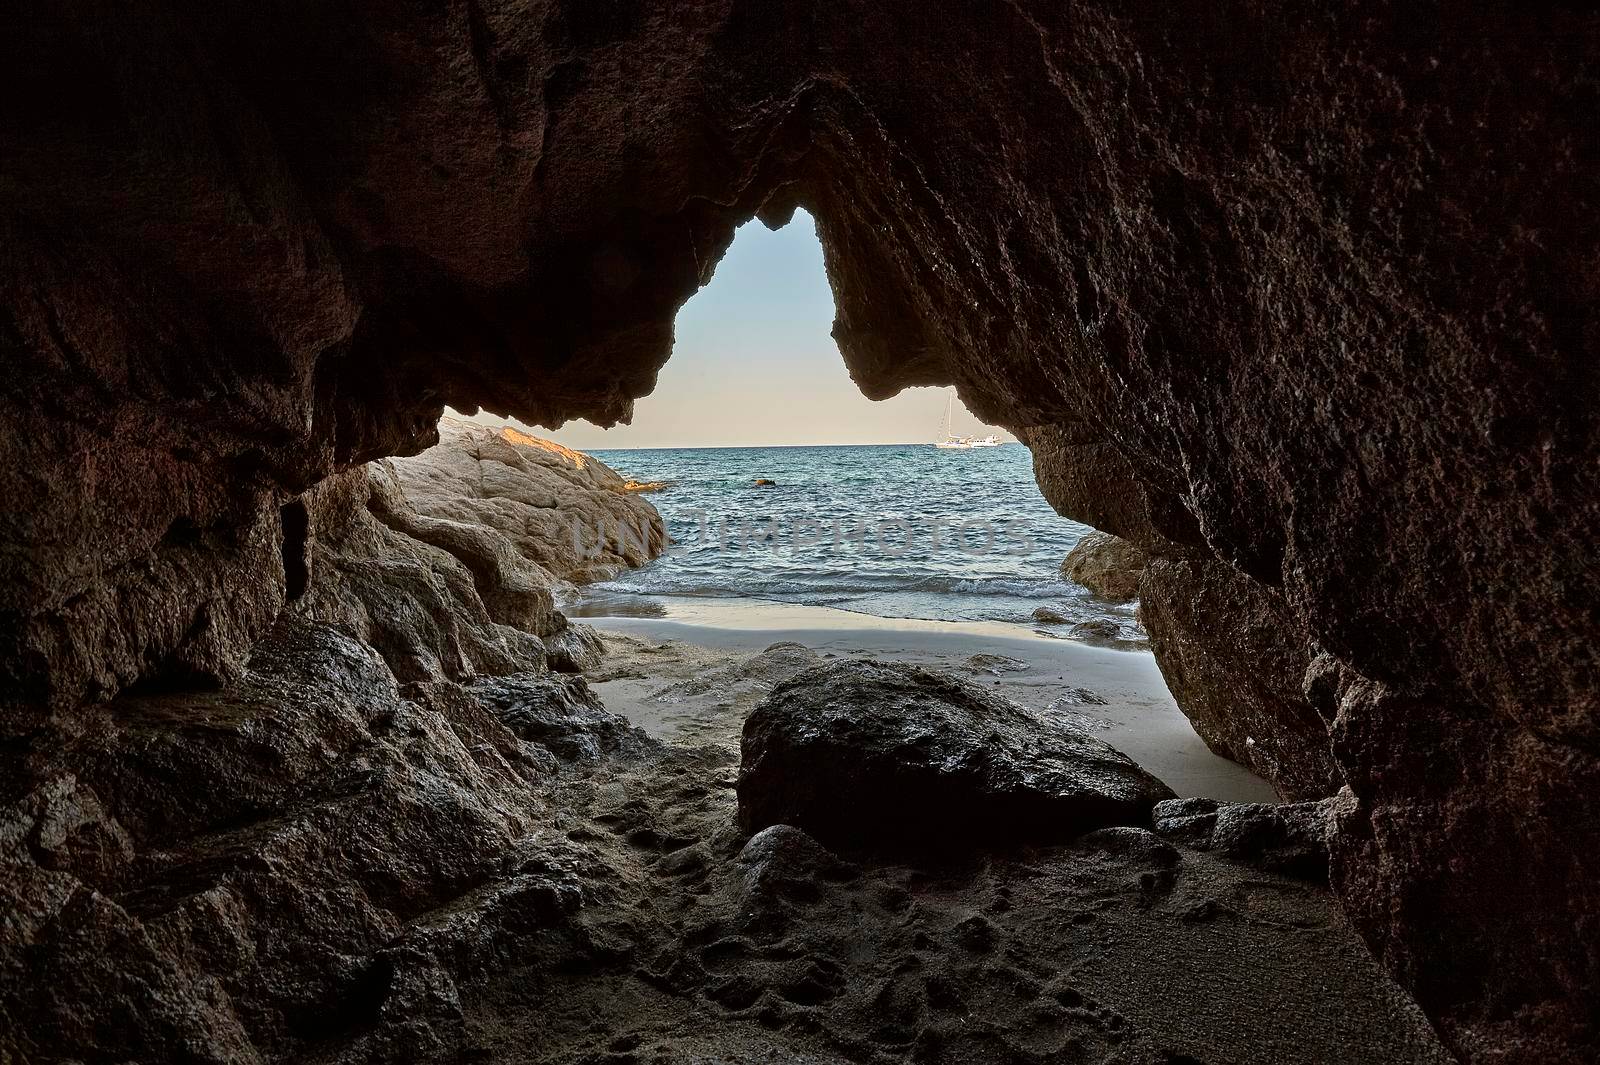 Rocky cave of a southern Sardinian beach overlooking the sea: a symbol of leaving your old being to cling to the new future.